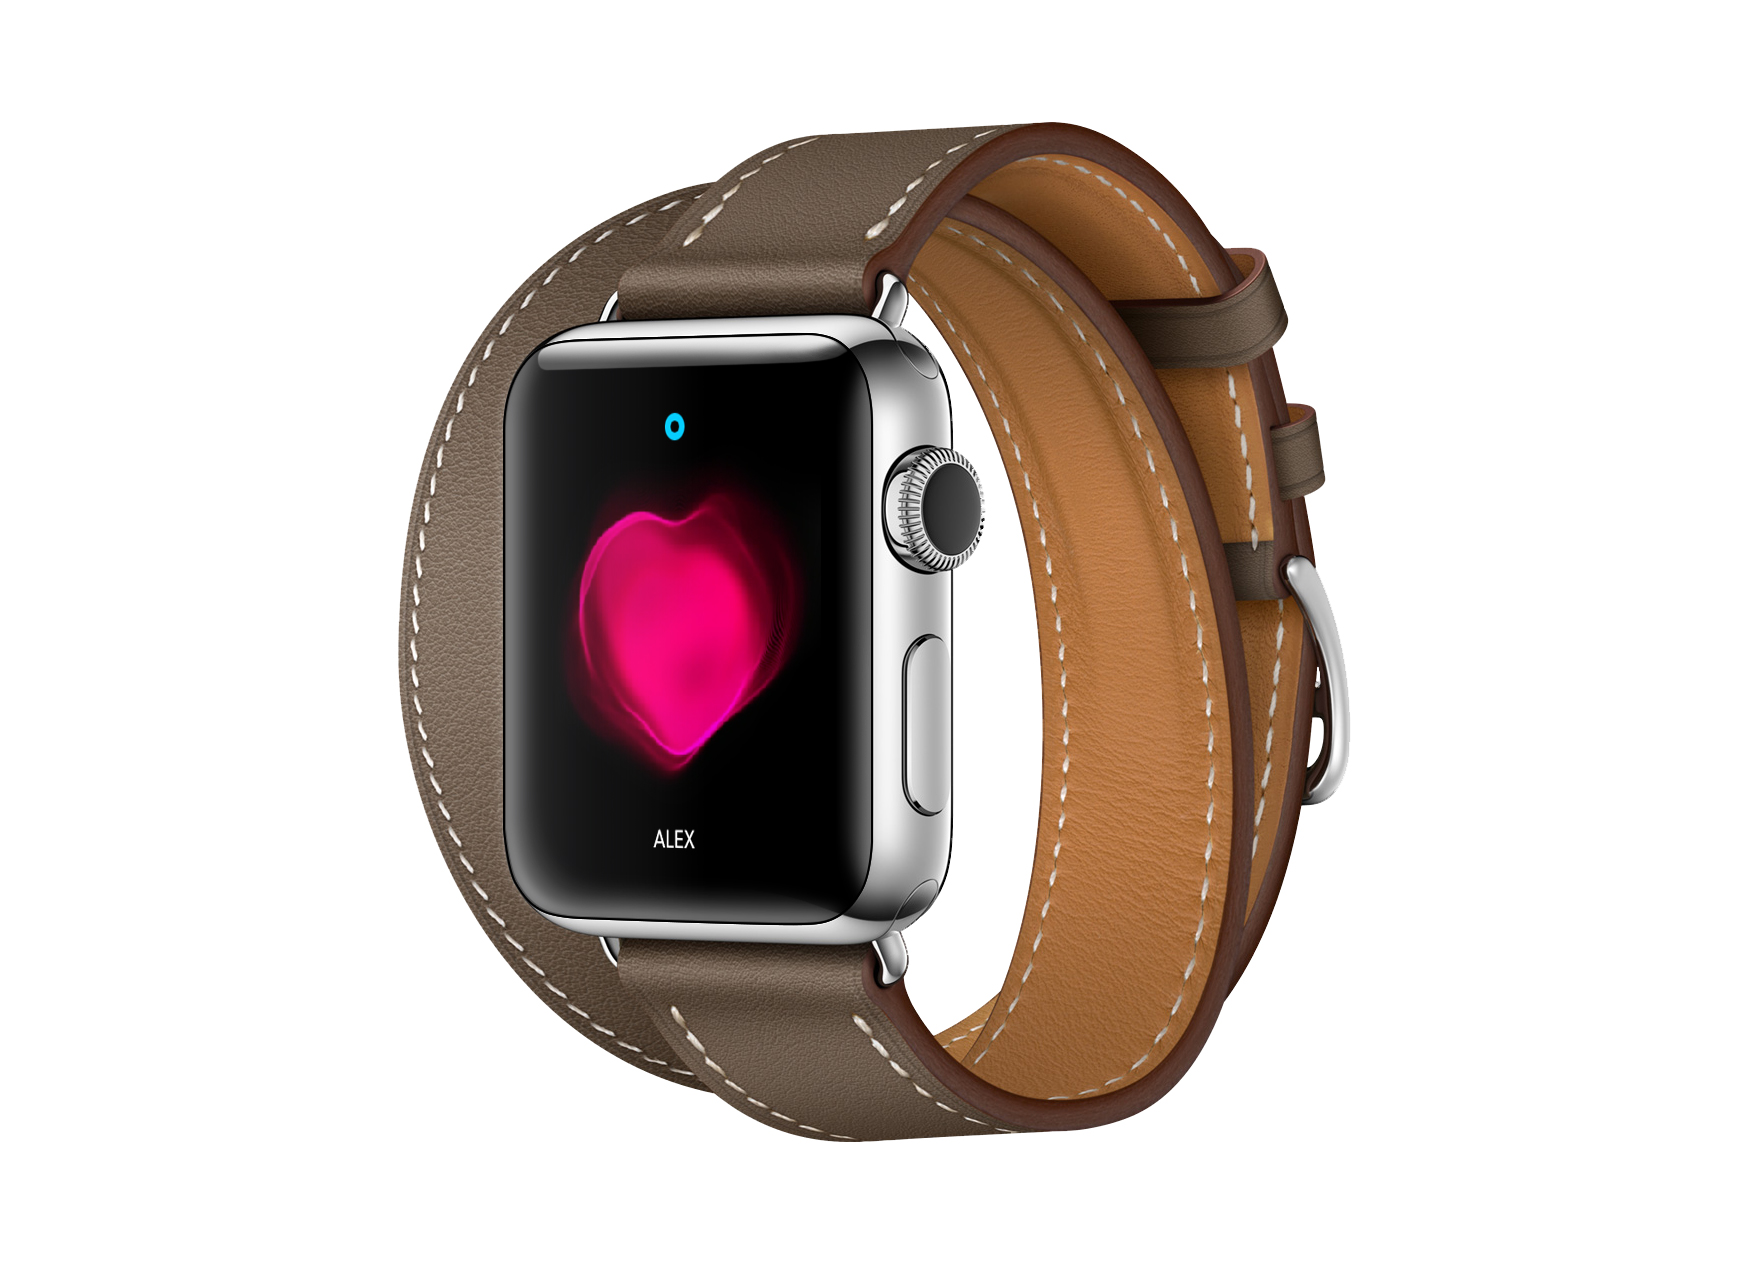 Download Apple Watch Leather Band Mockup PSD - Best Free Mockups